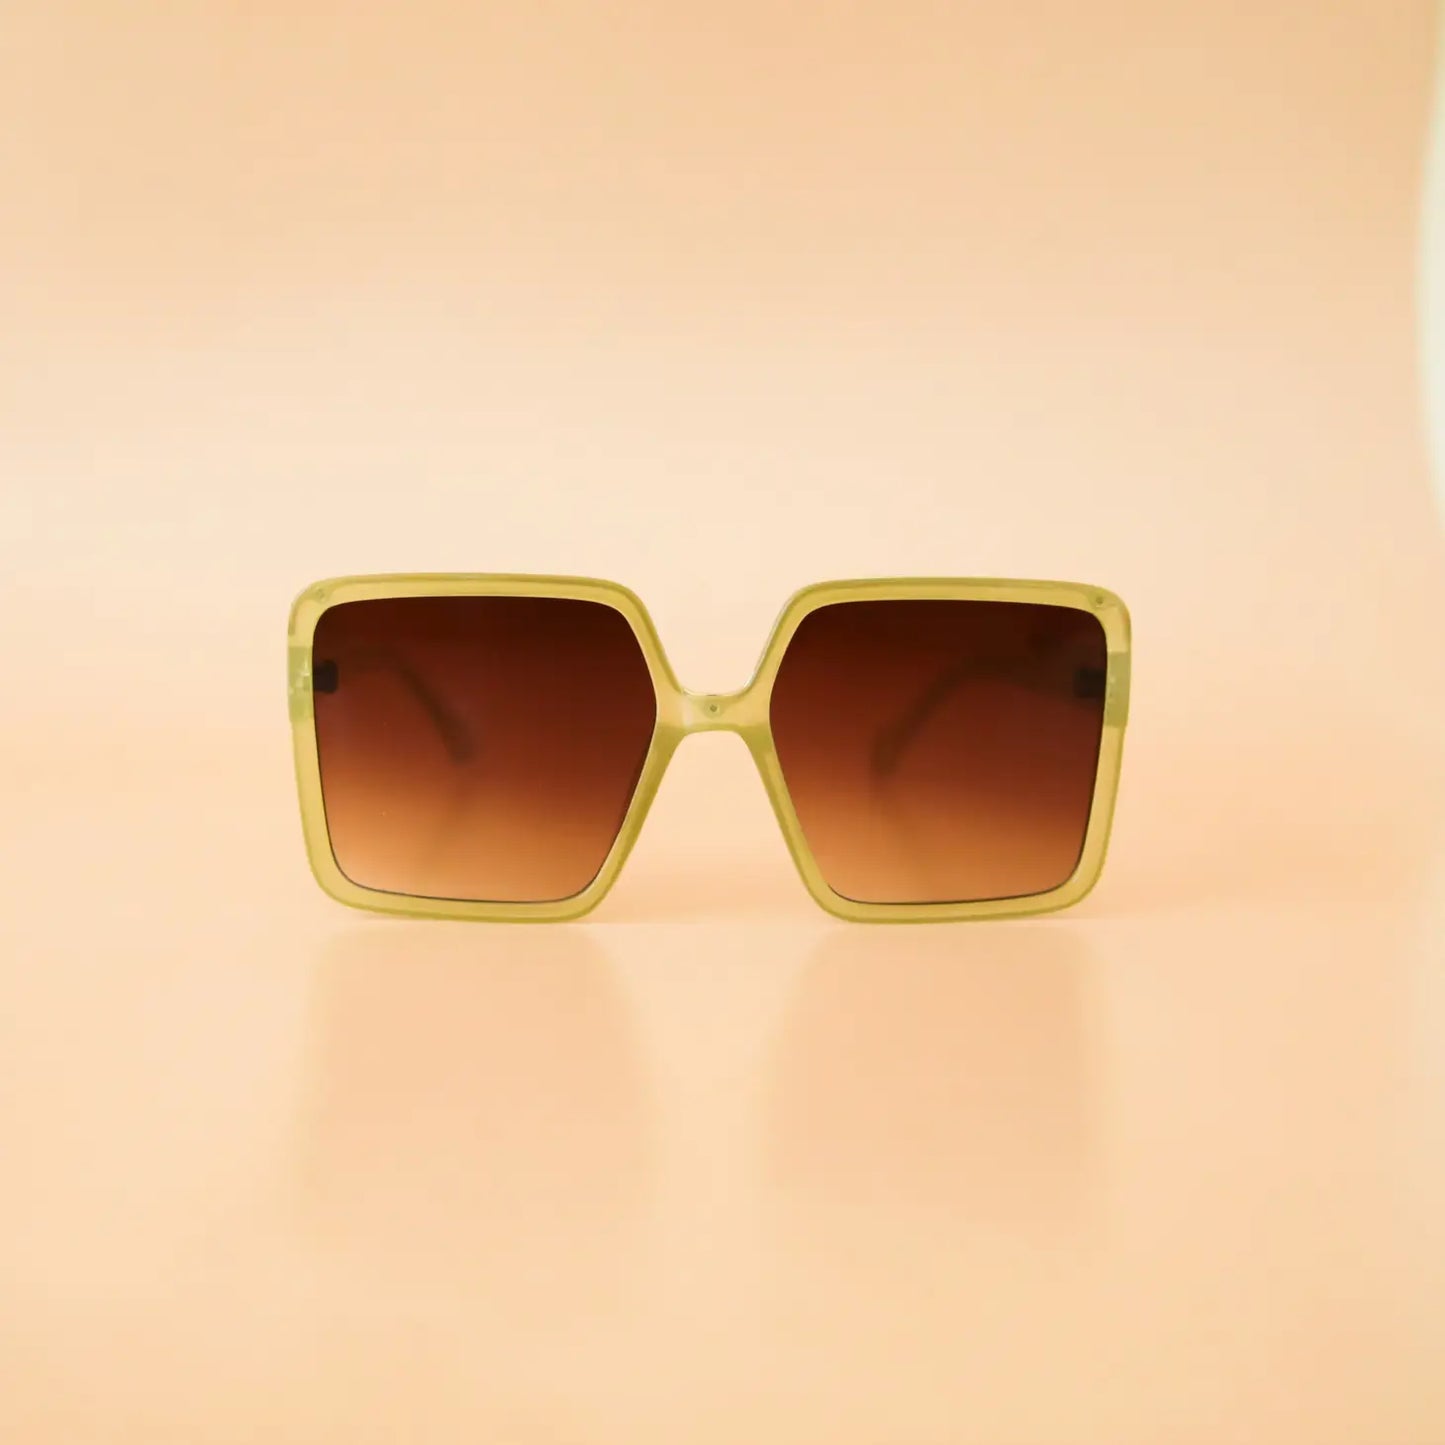 kelso sunglasses in olive